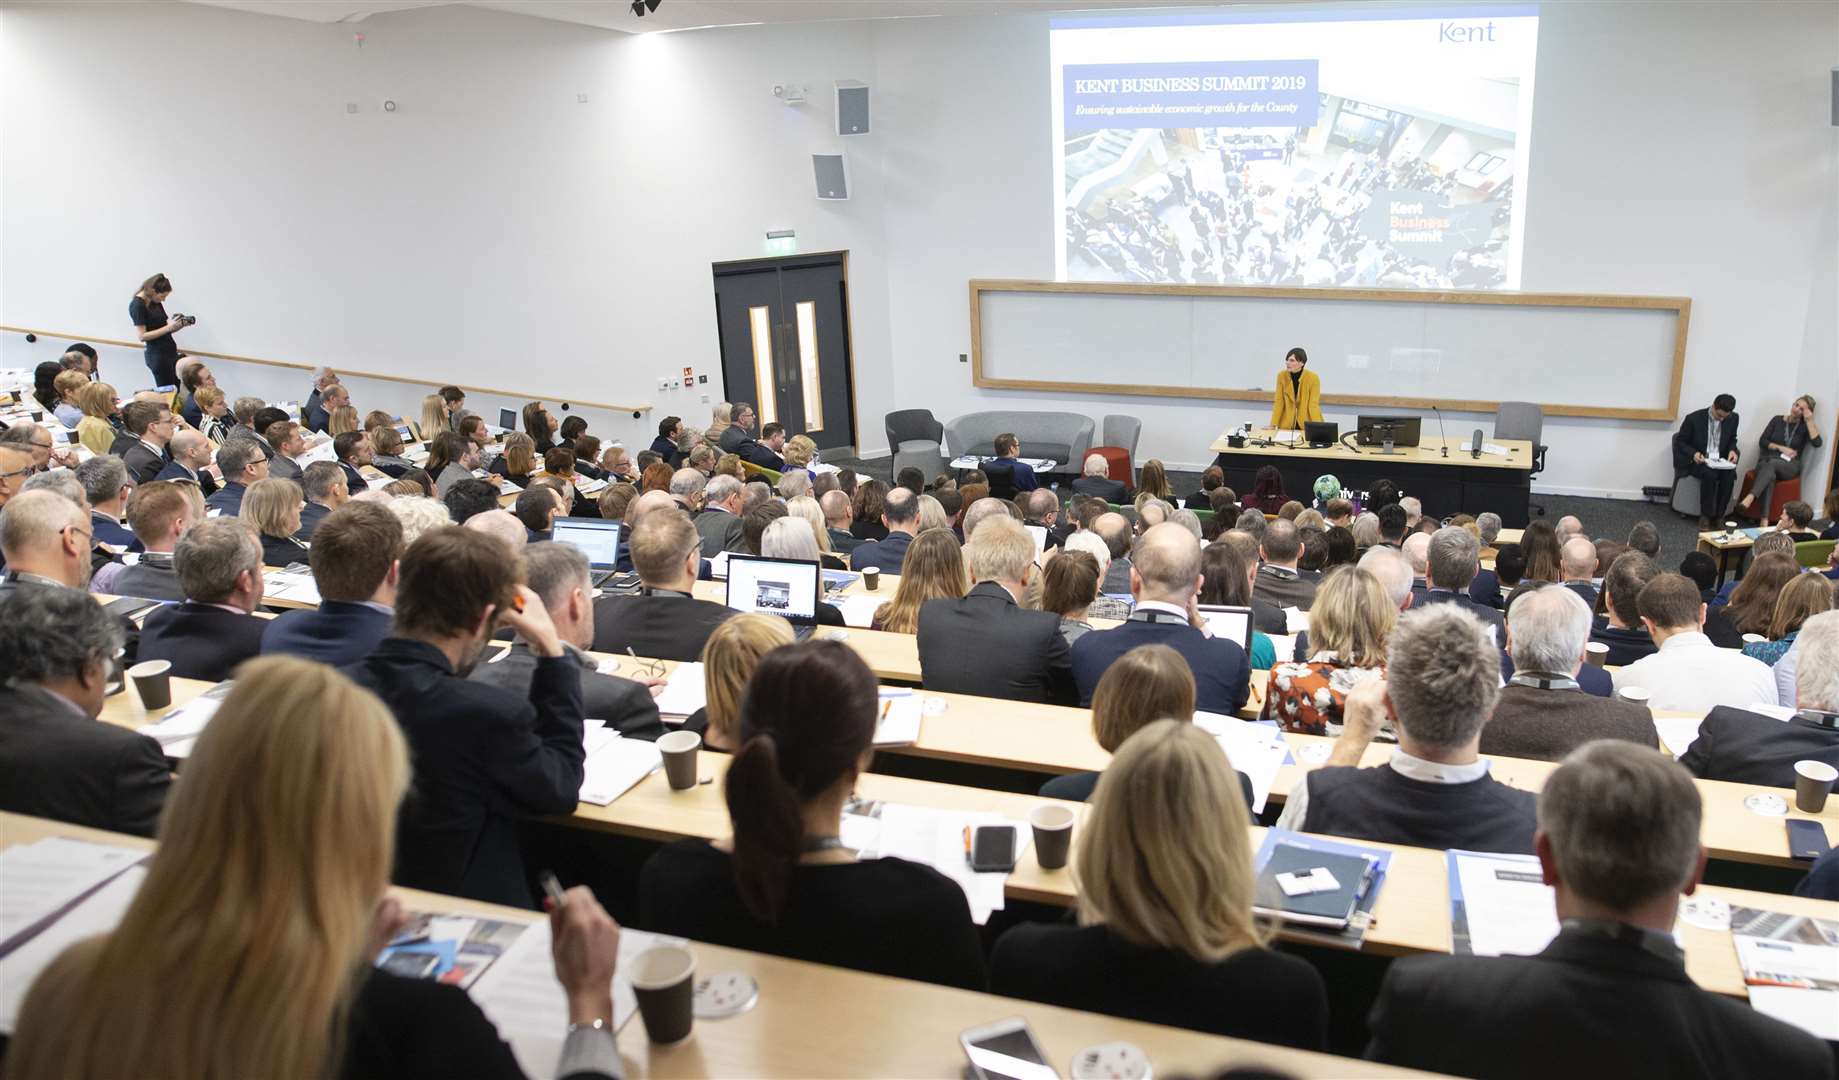 The popular annual Kent Business Summit is organised by the Kent Business School